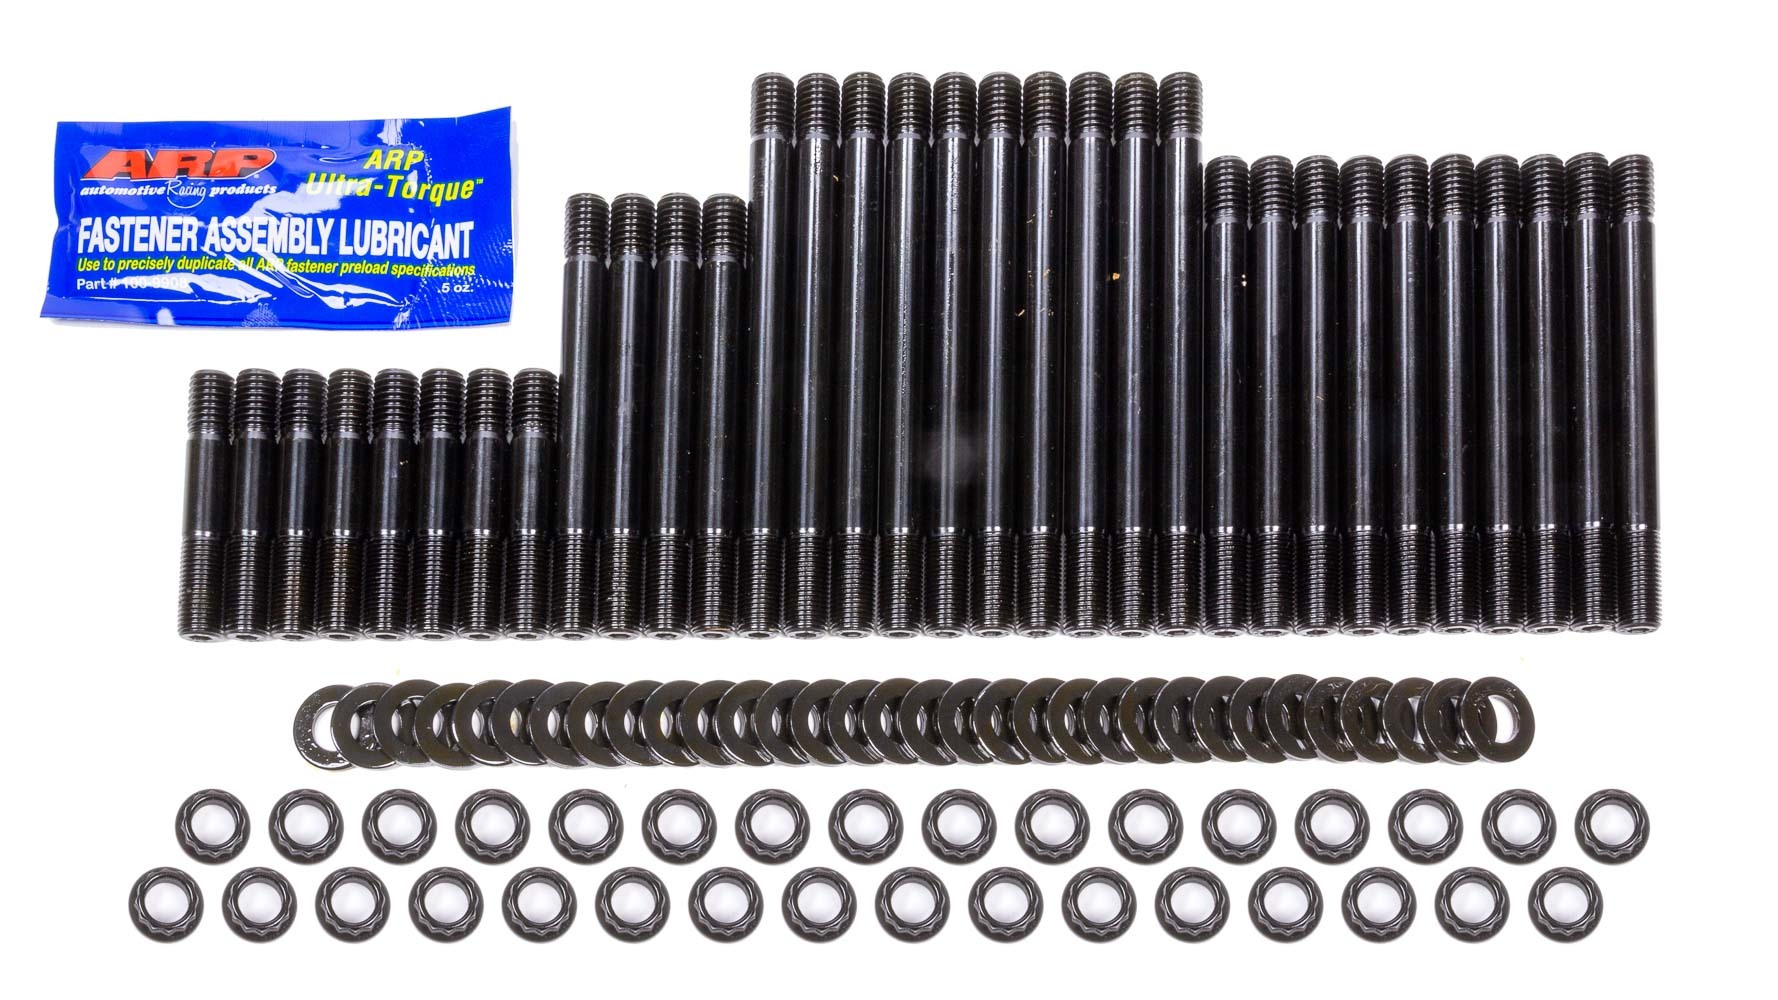 ARP 135-4305 Cylinder Head Stud, 12 Point Nuts, Chromoly, Black Oxide, 18 Degree Air Flow Research, Big Block Chevy, Kit